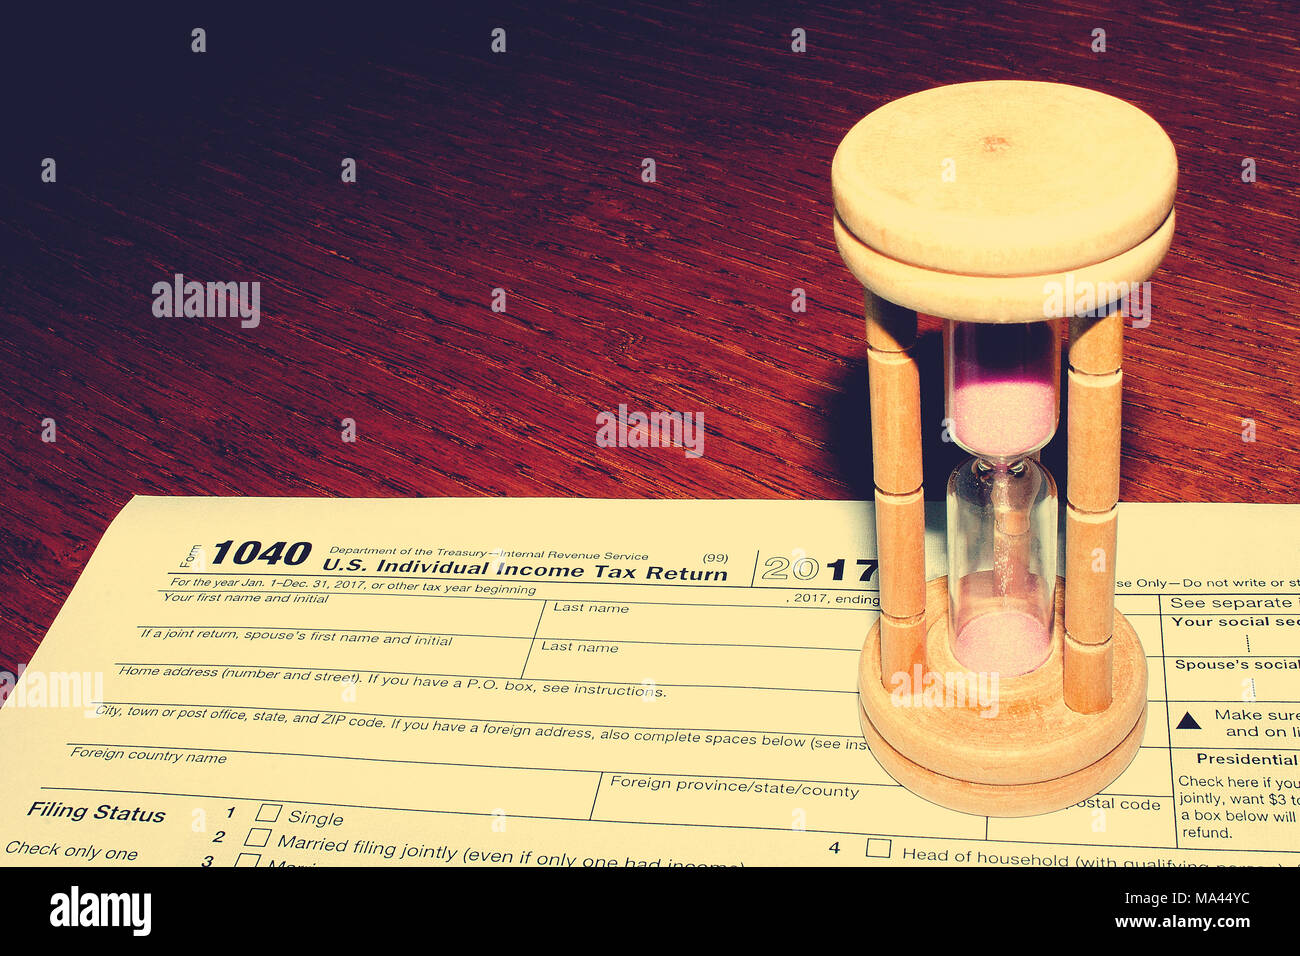 Tax day. The tax form 1040 and hourglass is on a wooden table. Stock Photo